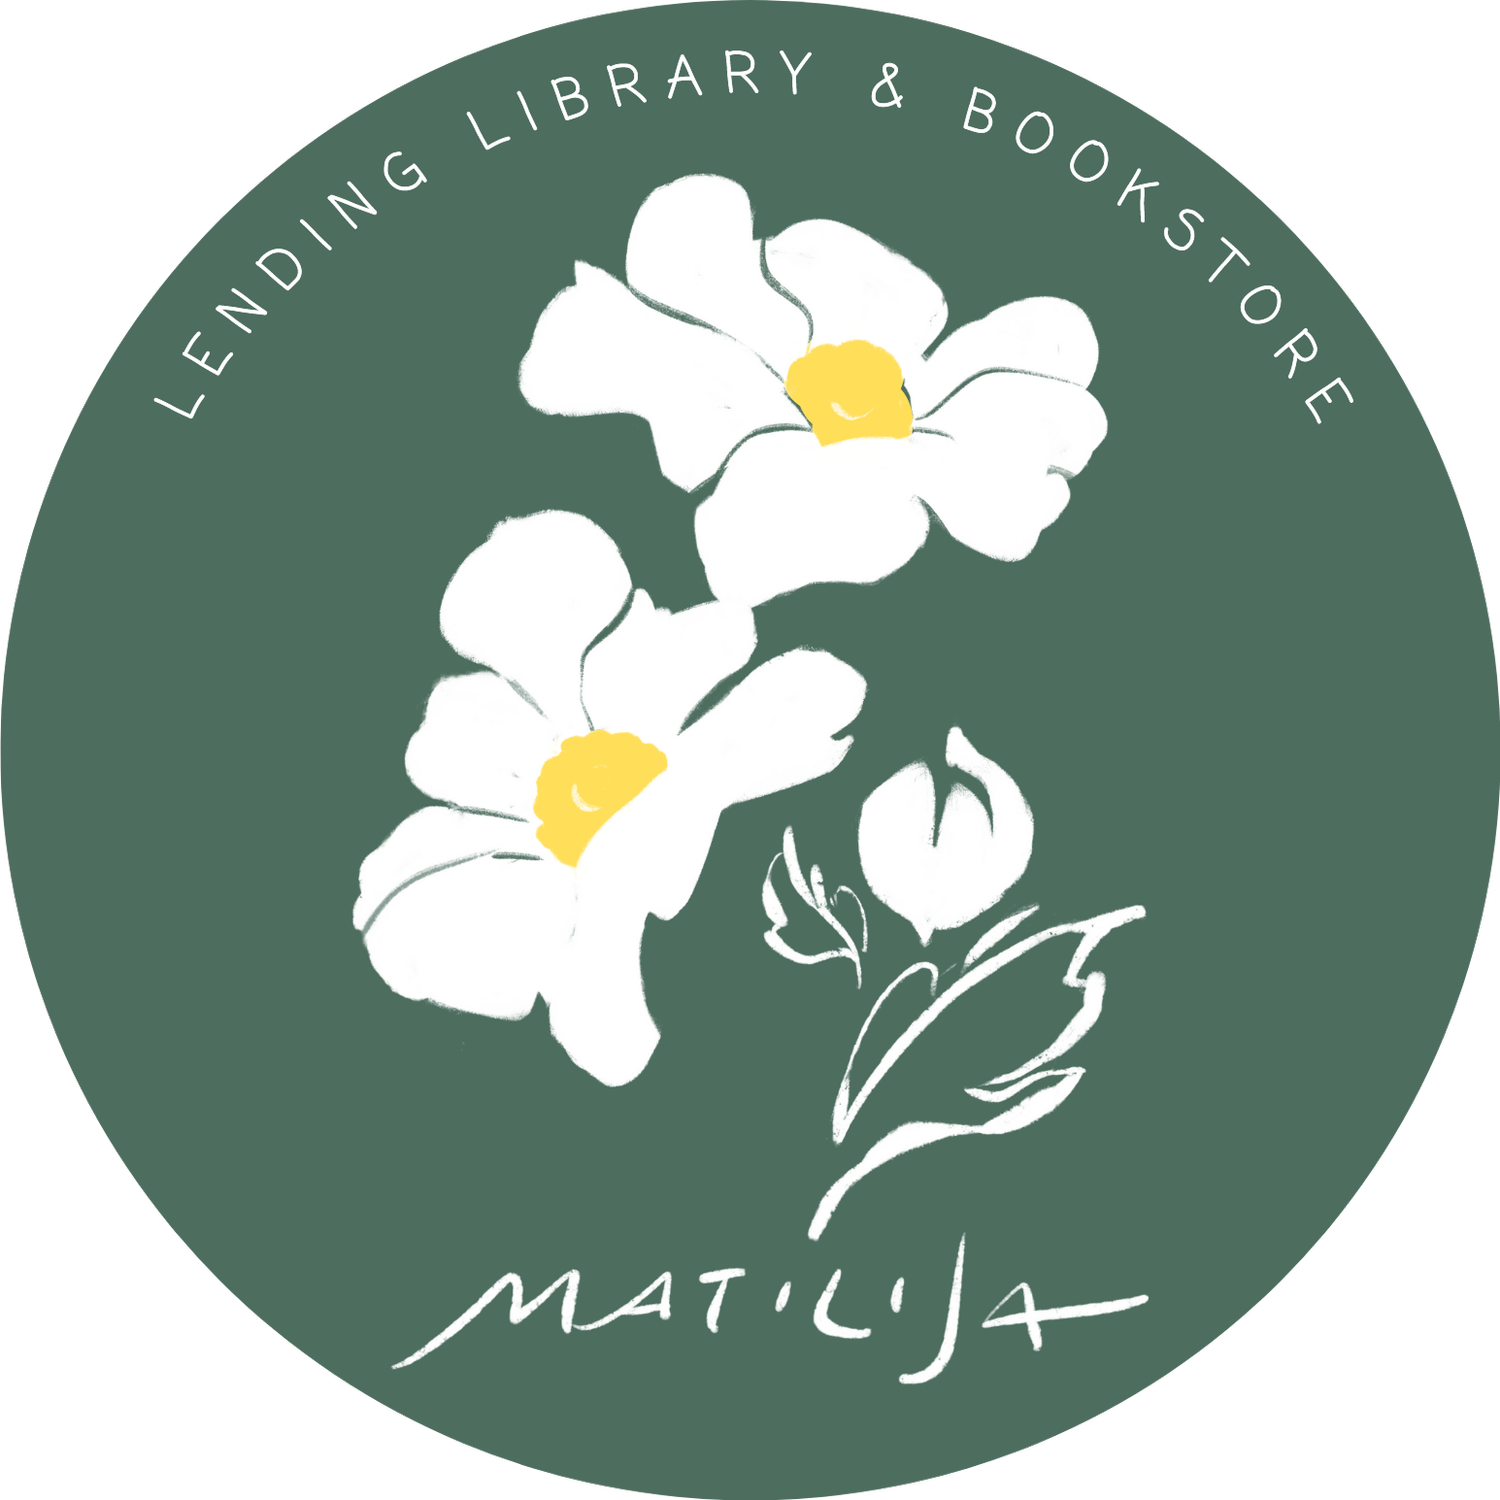 Matilija Lending Library and Bookstore